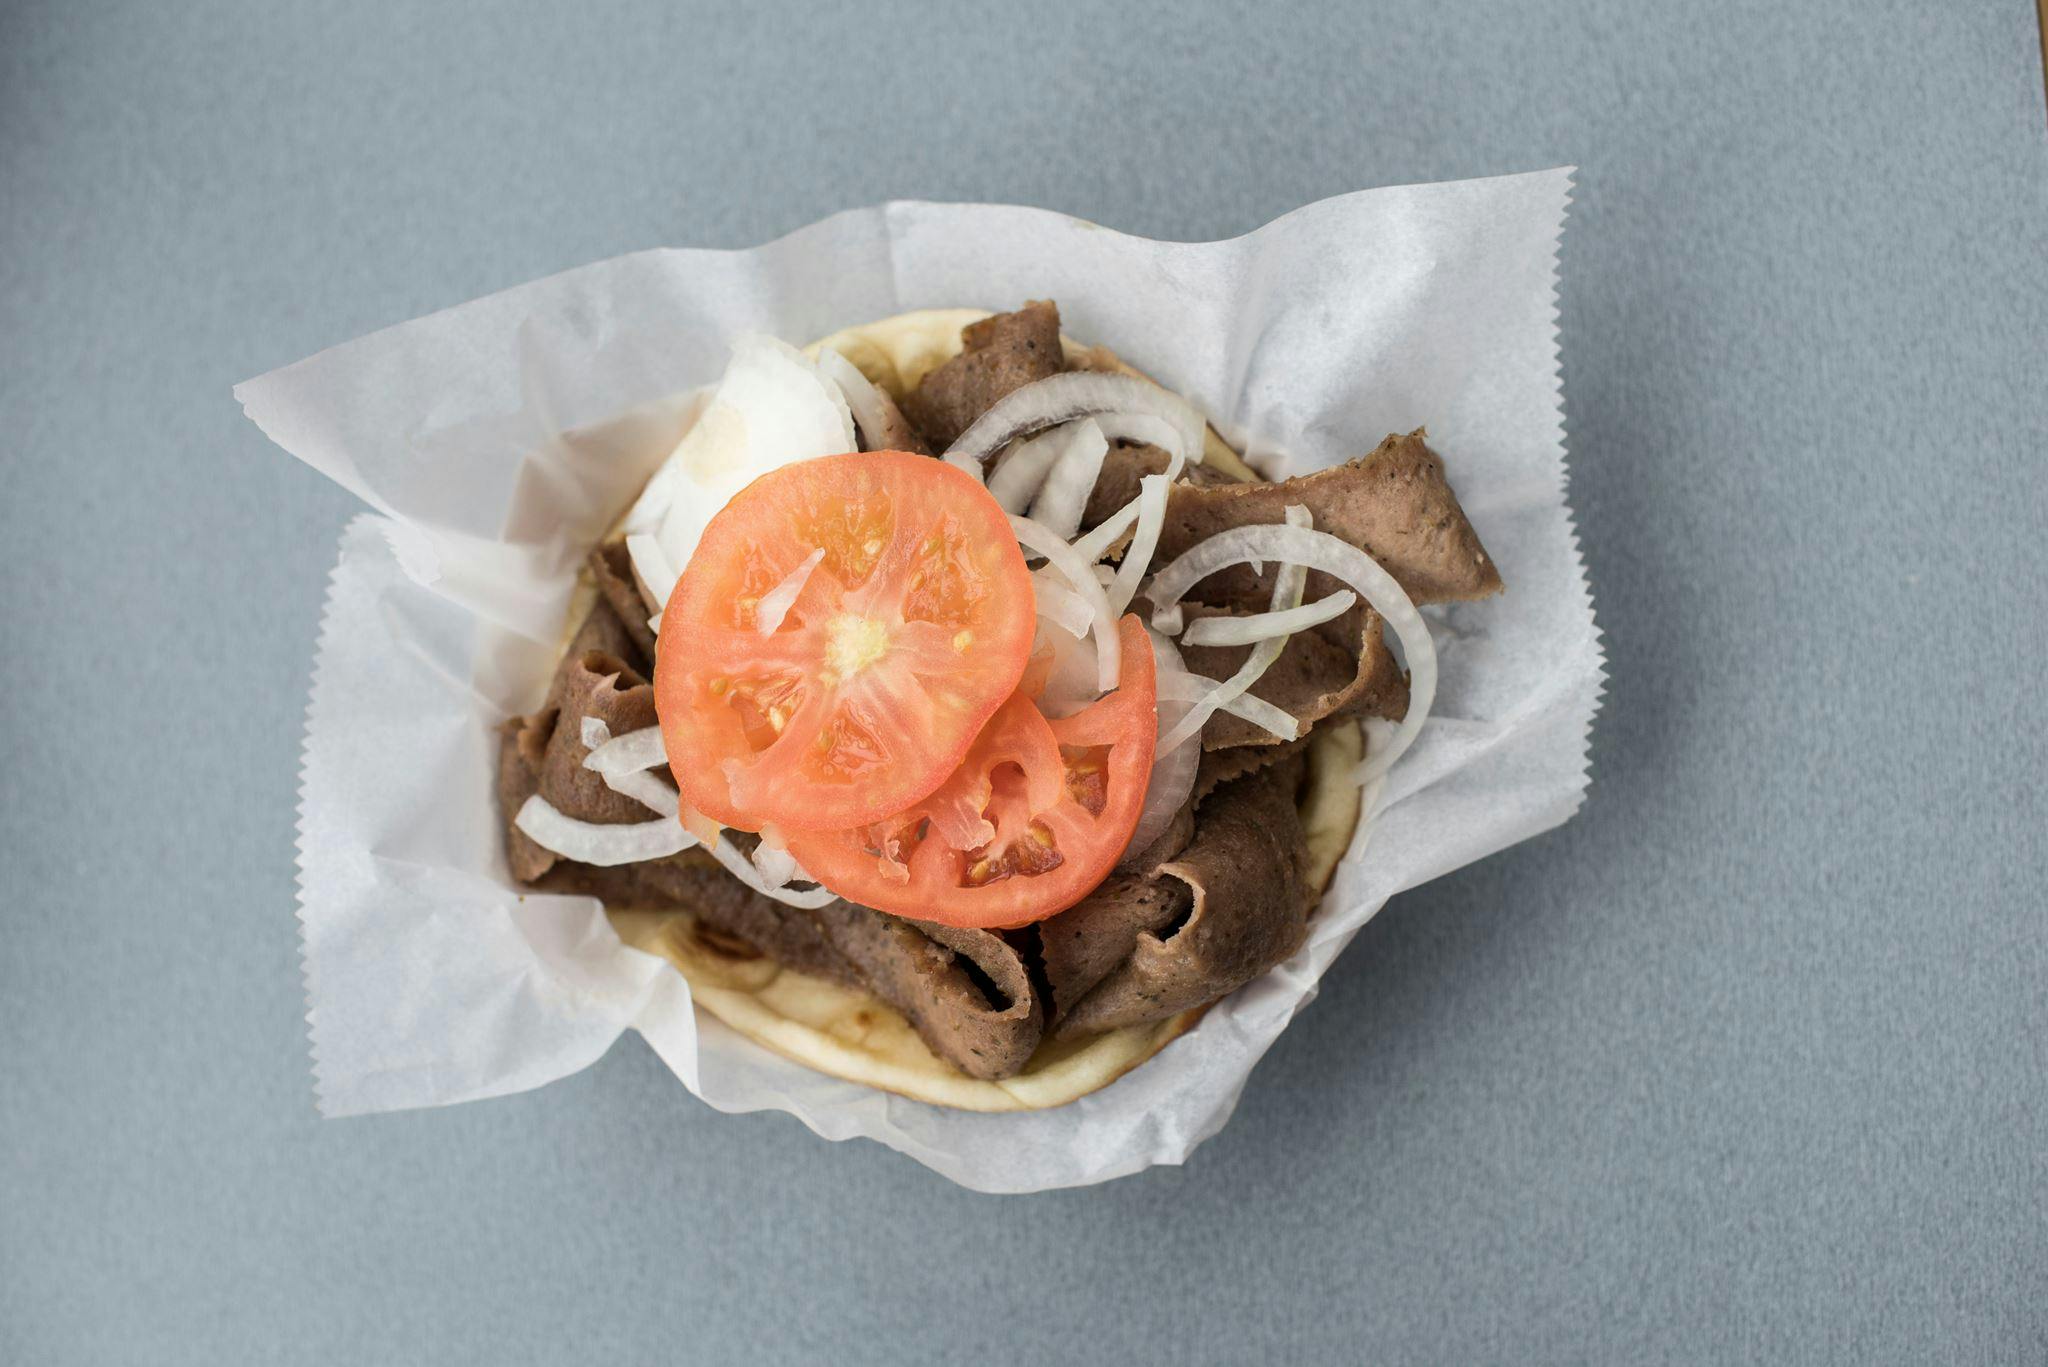 Gyro Sandwich from Gyro Palace - Glendale in Glendale, WI